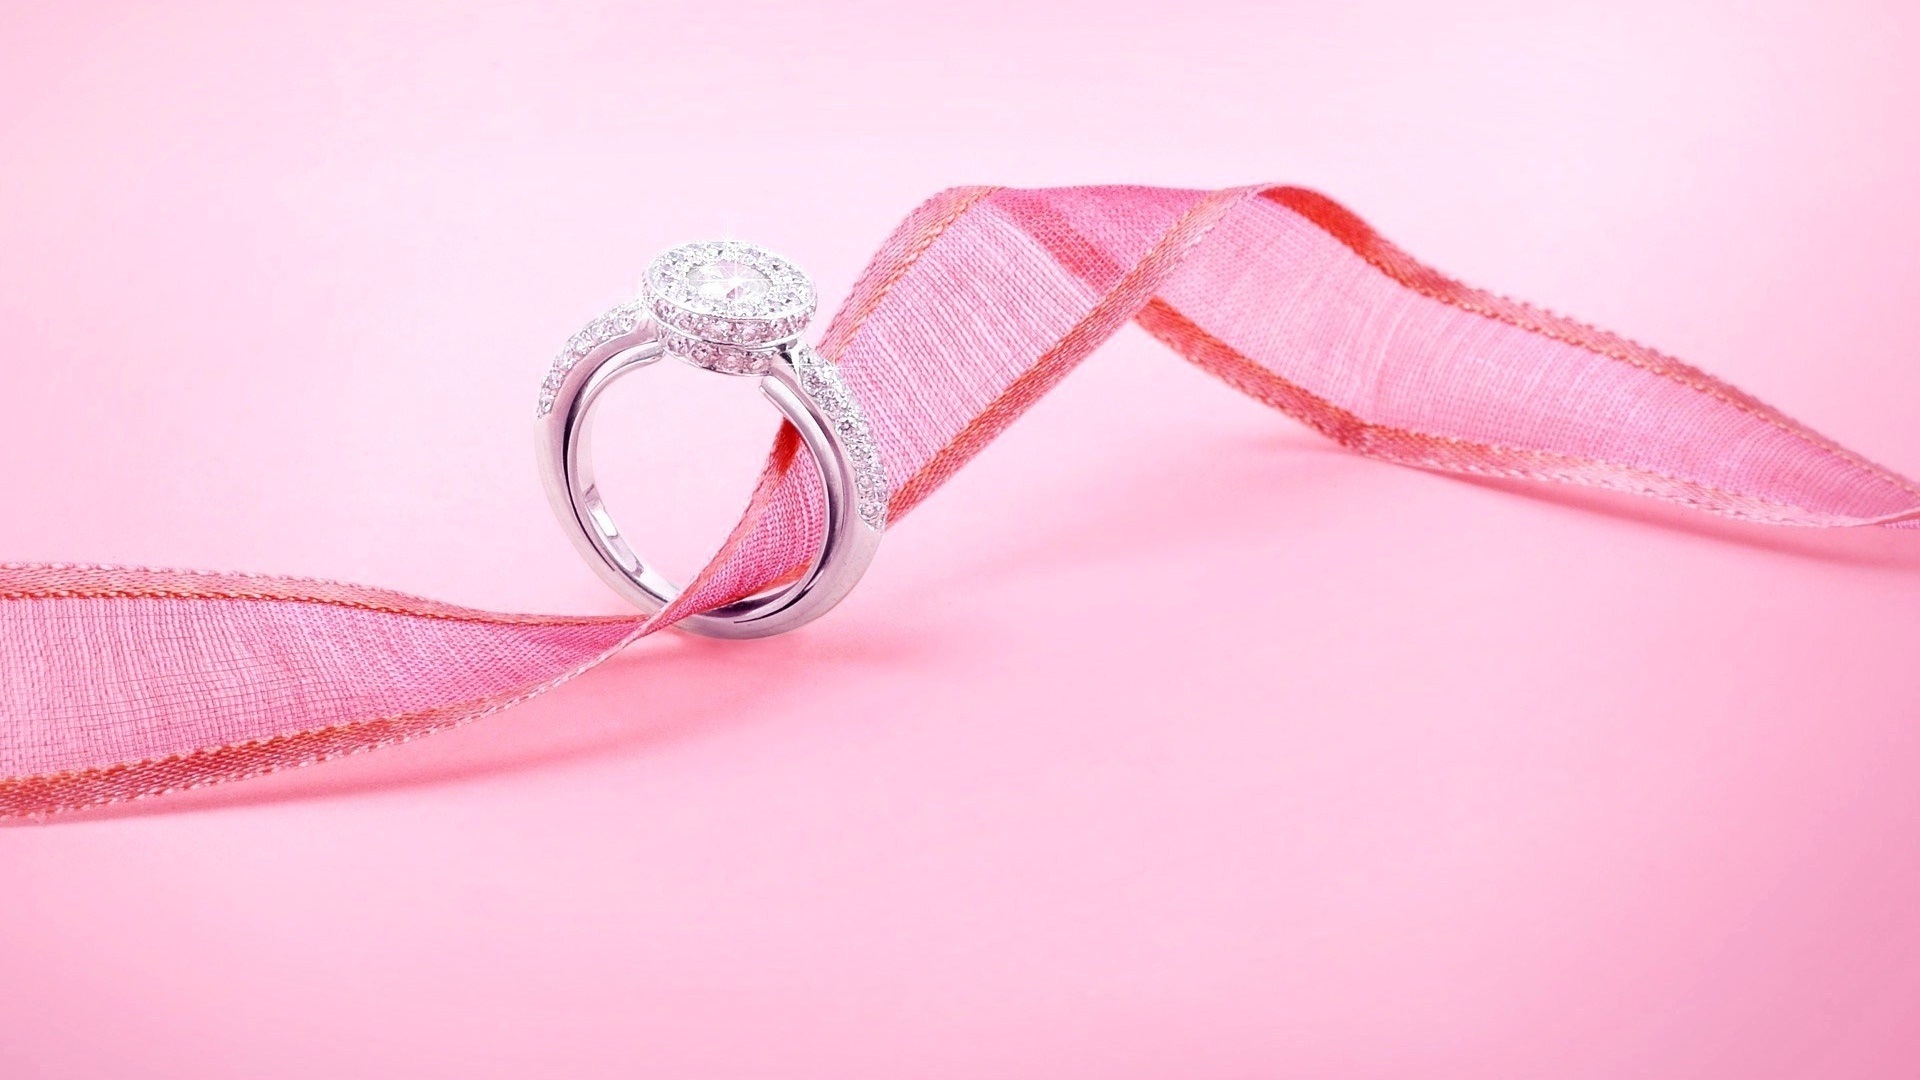 Jewellery Ring For Your Love Gift Wallpaper HD Rocks